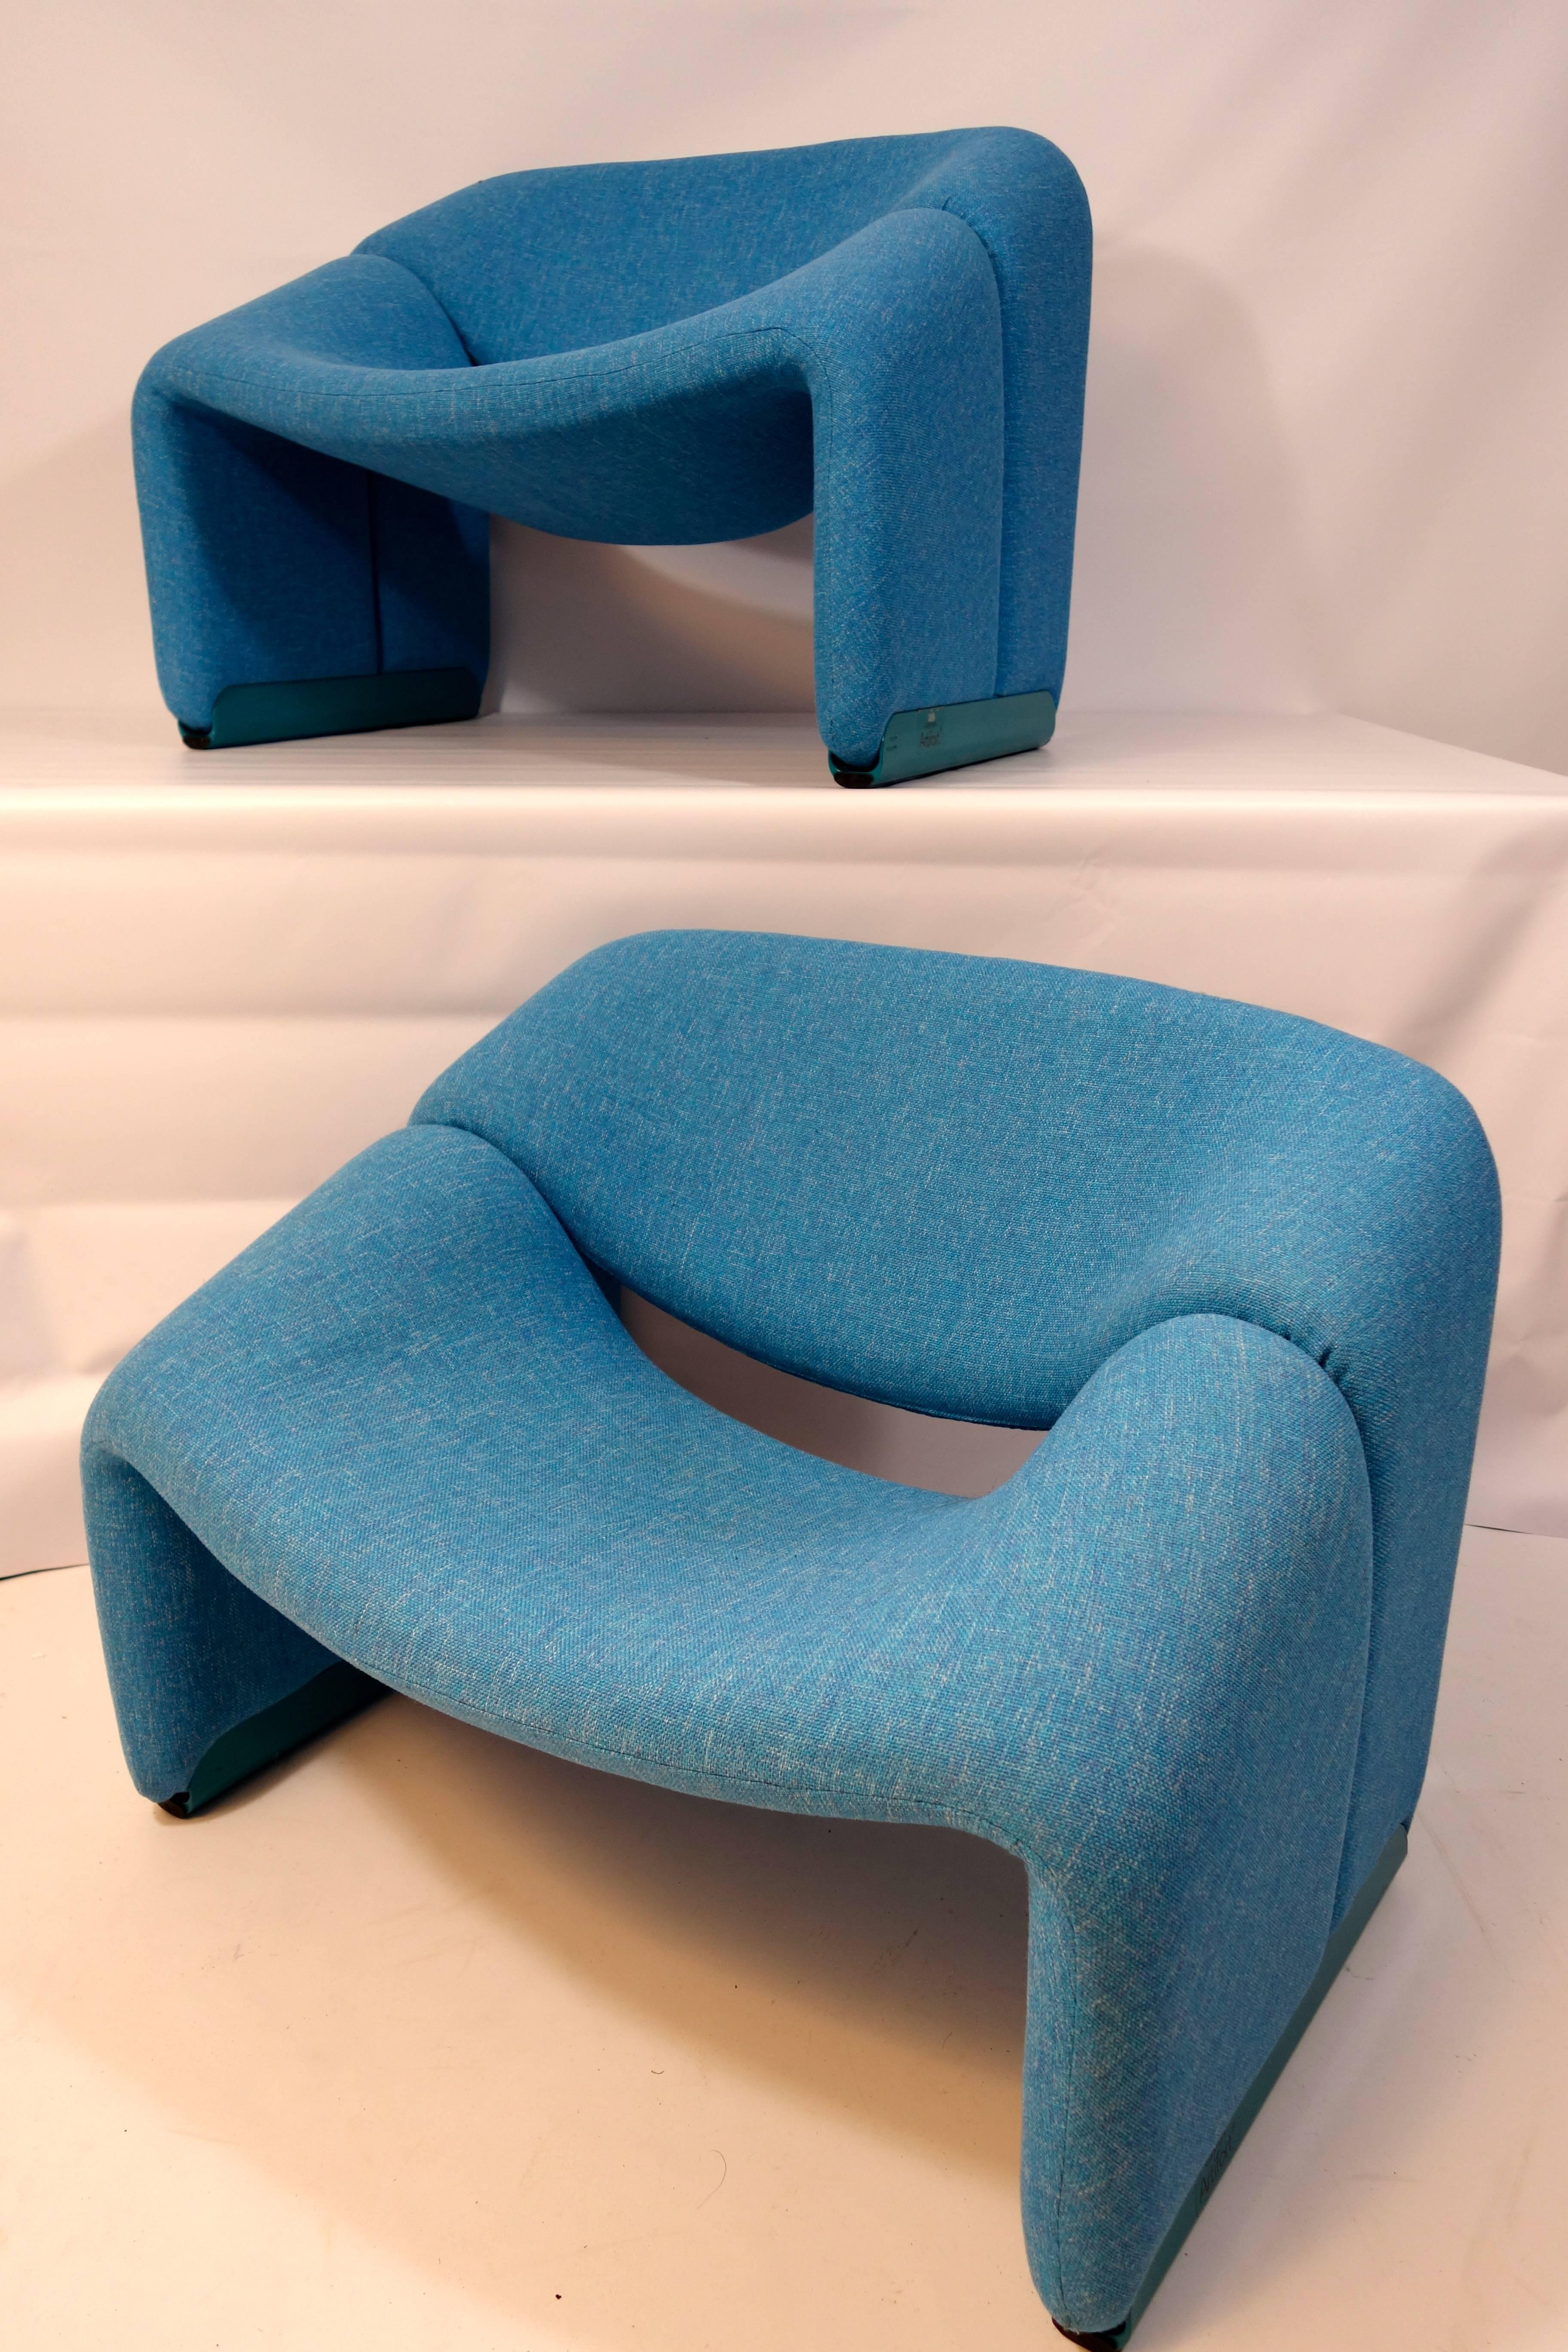 Set of two Groovy chairs designed in 1972 by Pierre Paulin for Artifort. It is one of the French designer's most striking works. Pierre Paulin is considered to be one of the greatest designers of the 20th century.

The chairs are compact but